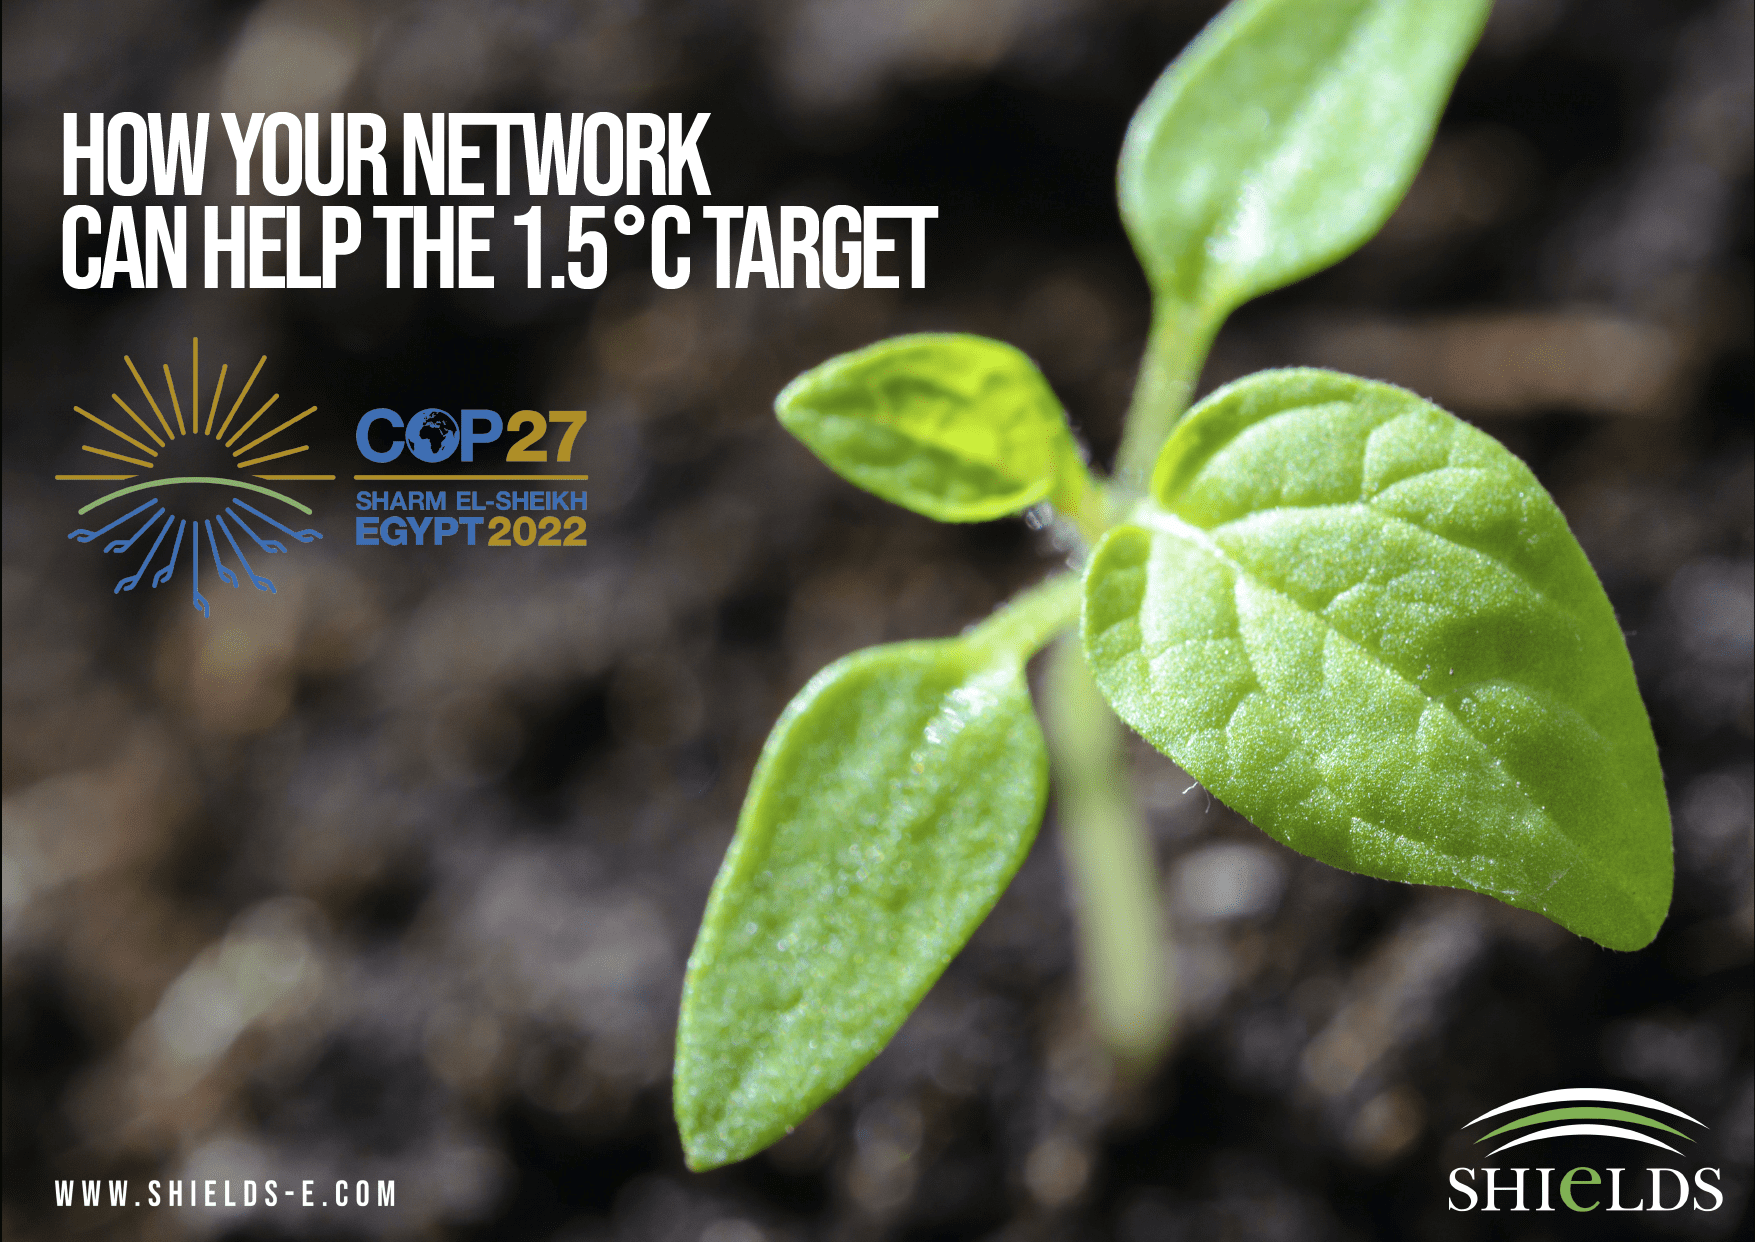 How Your Network Can Achieve the 1.5 degrees Celsius target as set out in COP27 Blog Header Graphic